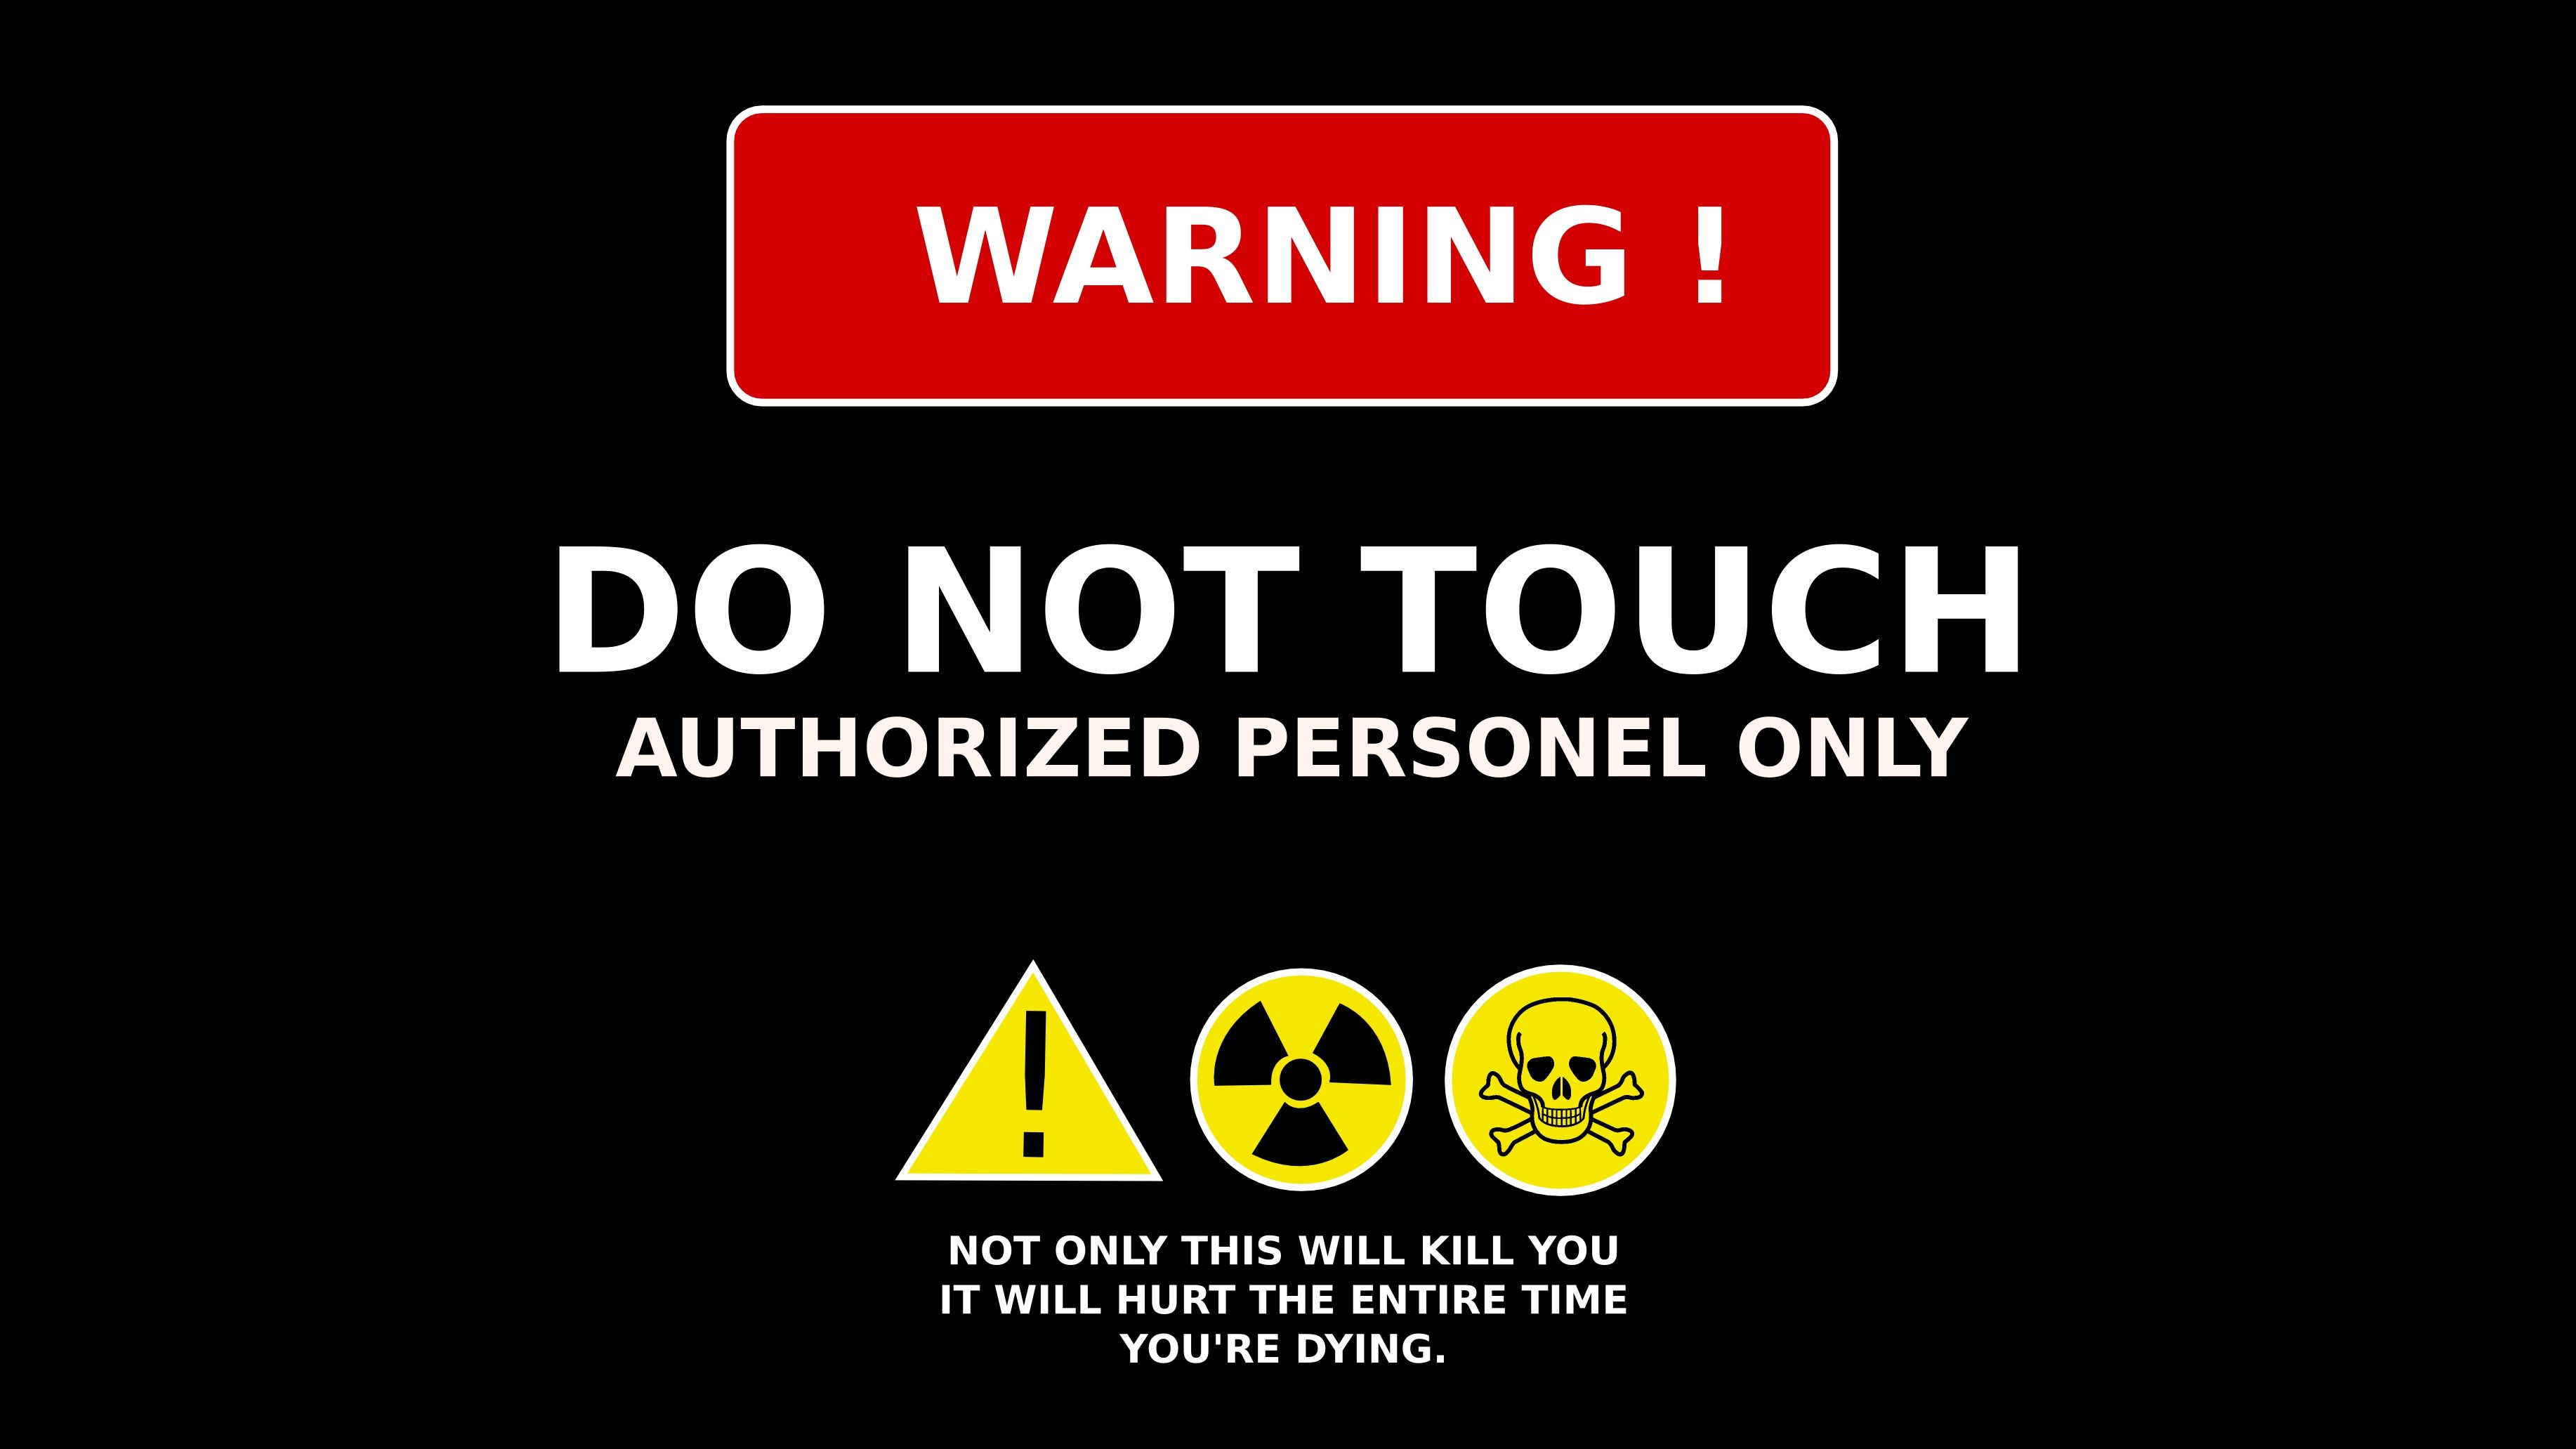 Free download WARNING DO NOT TOUCH wallpapers ForWallpapercom 3668x2063 for...